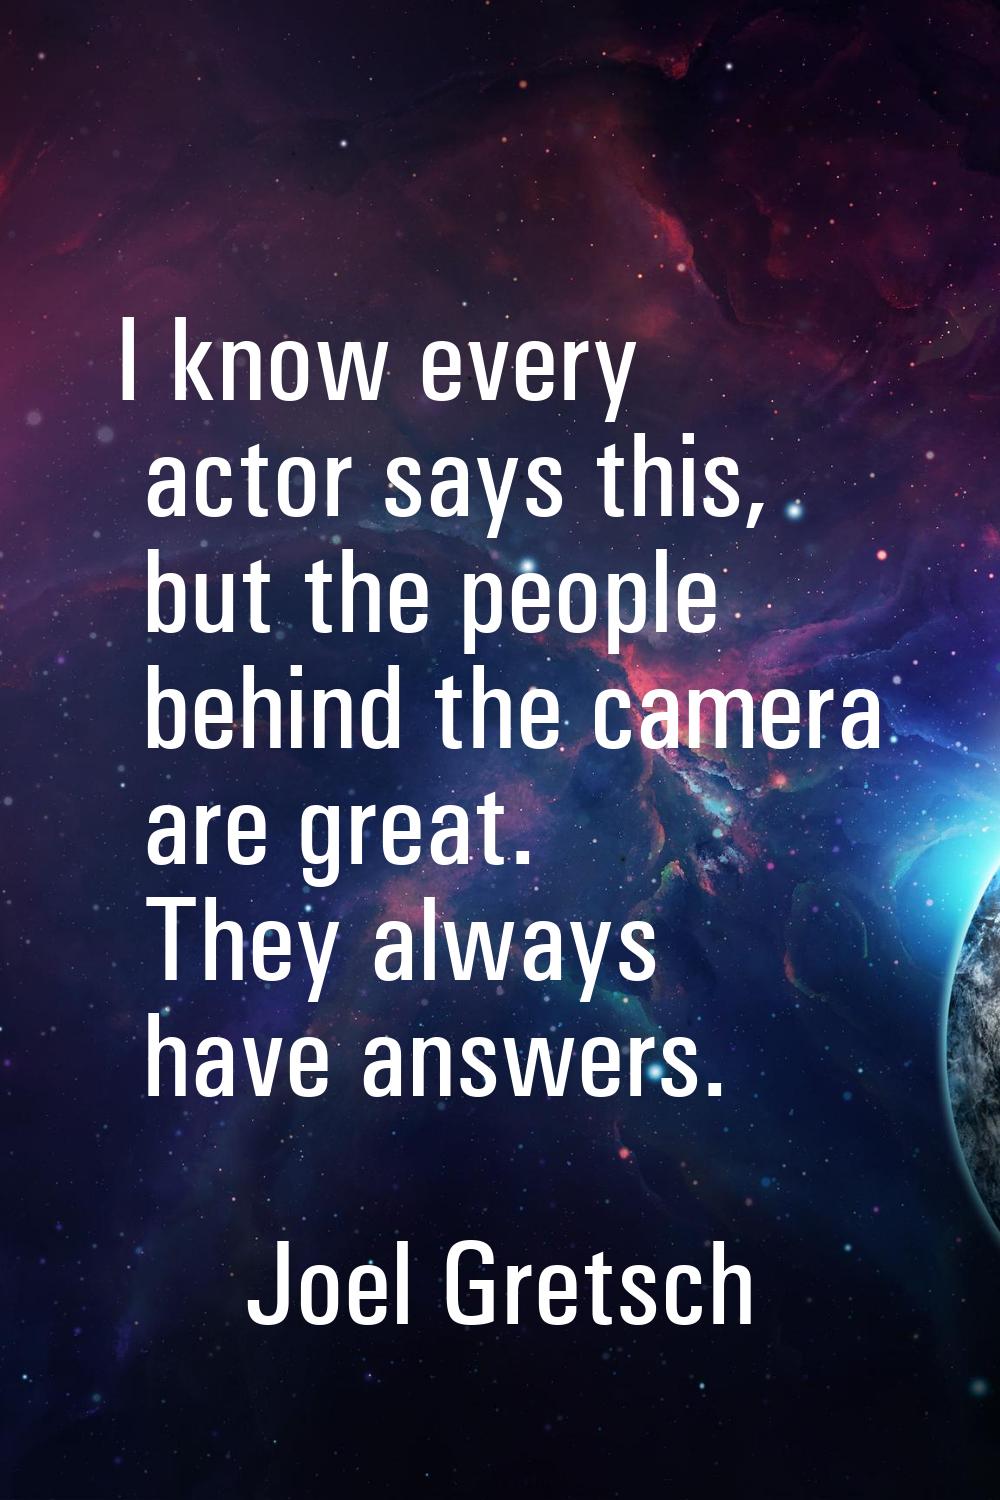 I know every actor says this, but the people behind the camera are great. They always have answers.